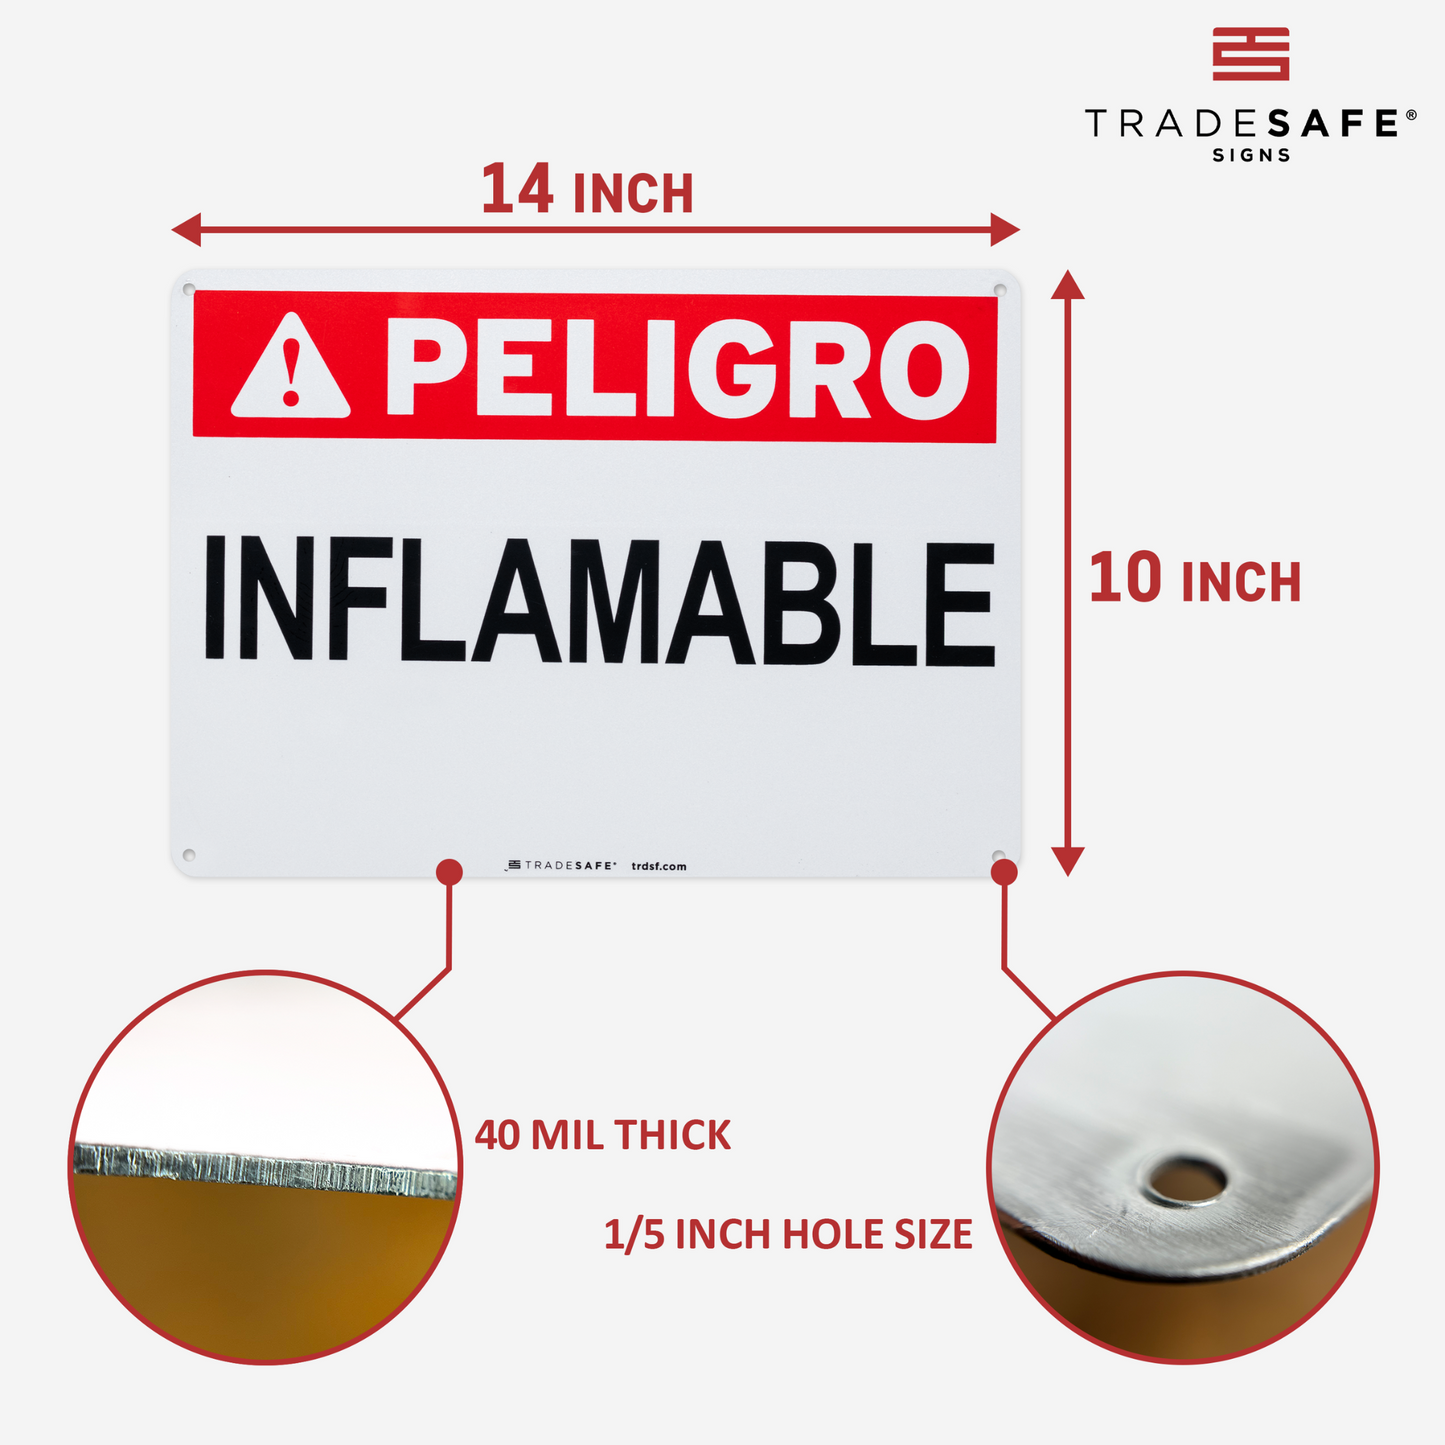 dimensions of peligro inflamable sign